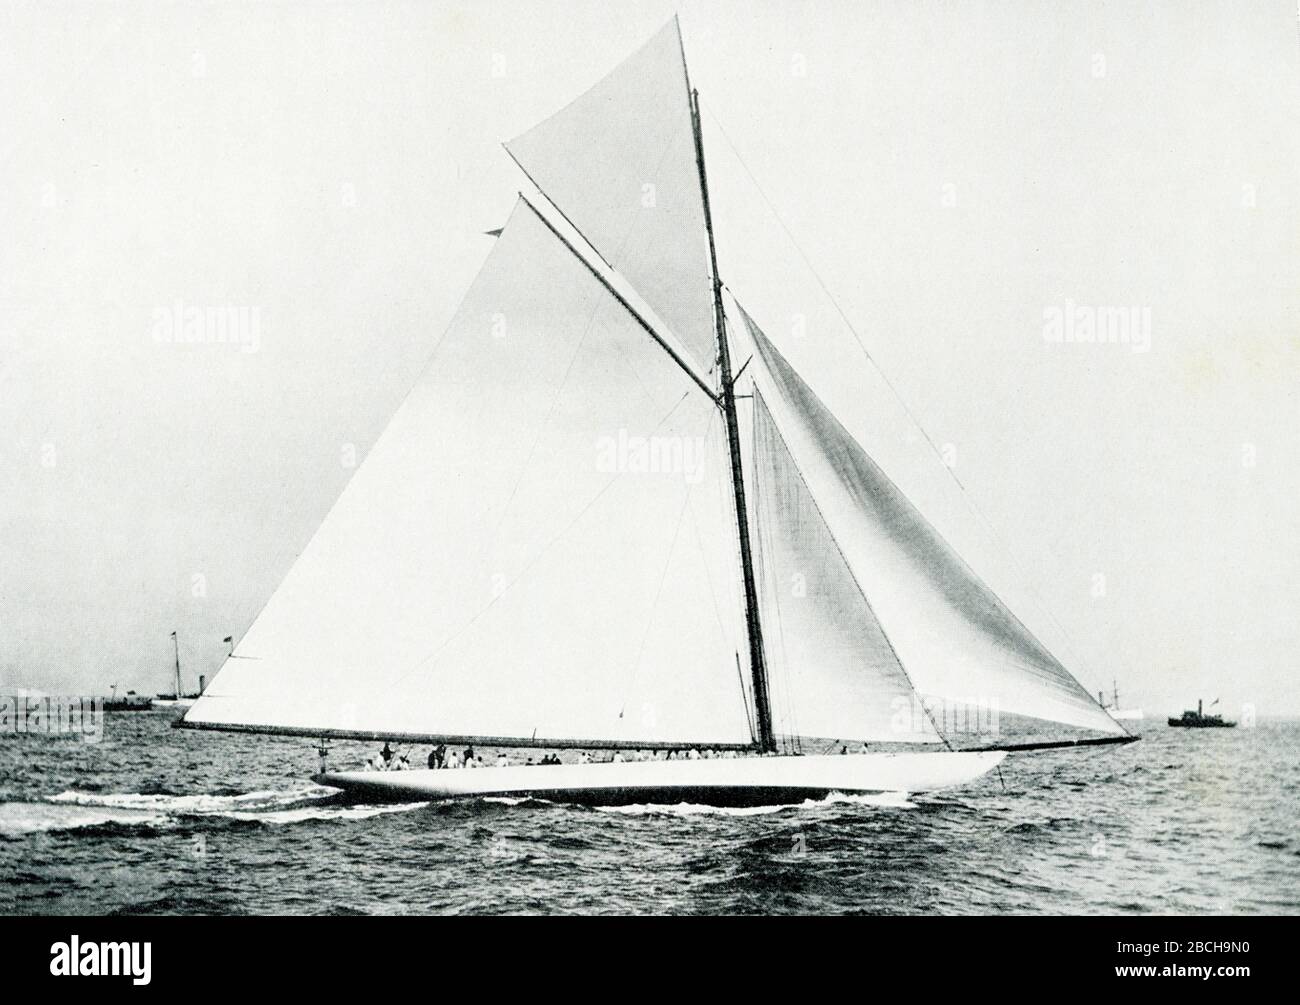 This photo shows the America Cup defender Columbia that was launched in 1899.  She was the defender of the tenth America's Cup race that same year against British challenger Shamrock as well as the defender of the eleventh America's Cup race in 1901 against British challenger Shamrock II. She was the first vessel to win the trophy twice in a row. The deisgner was Nathanael Greene Herreshoff. Stock Photo